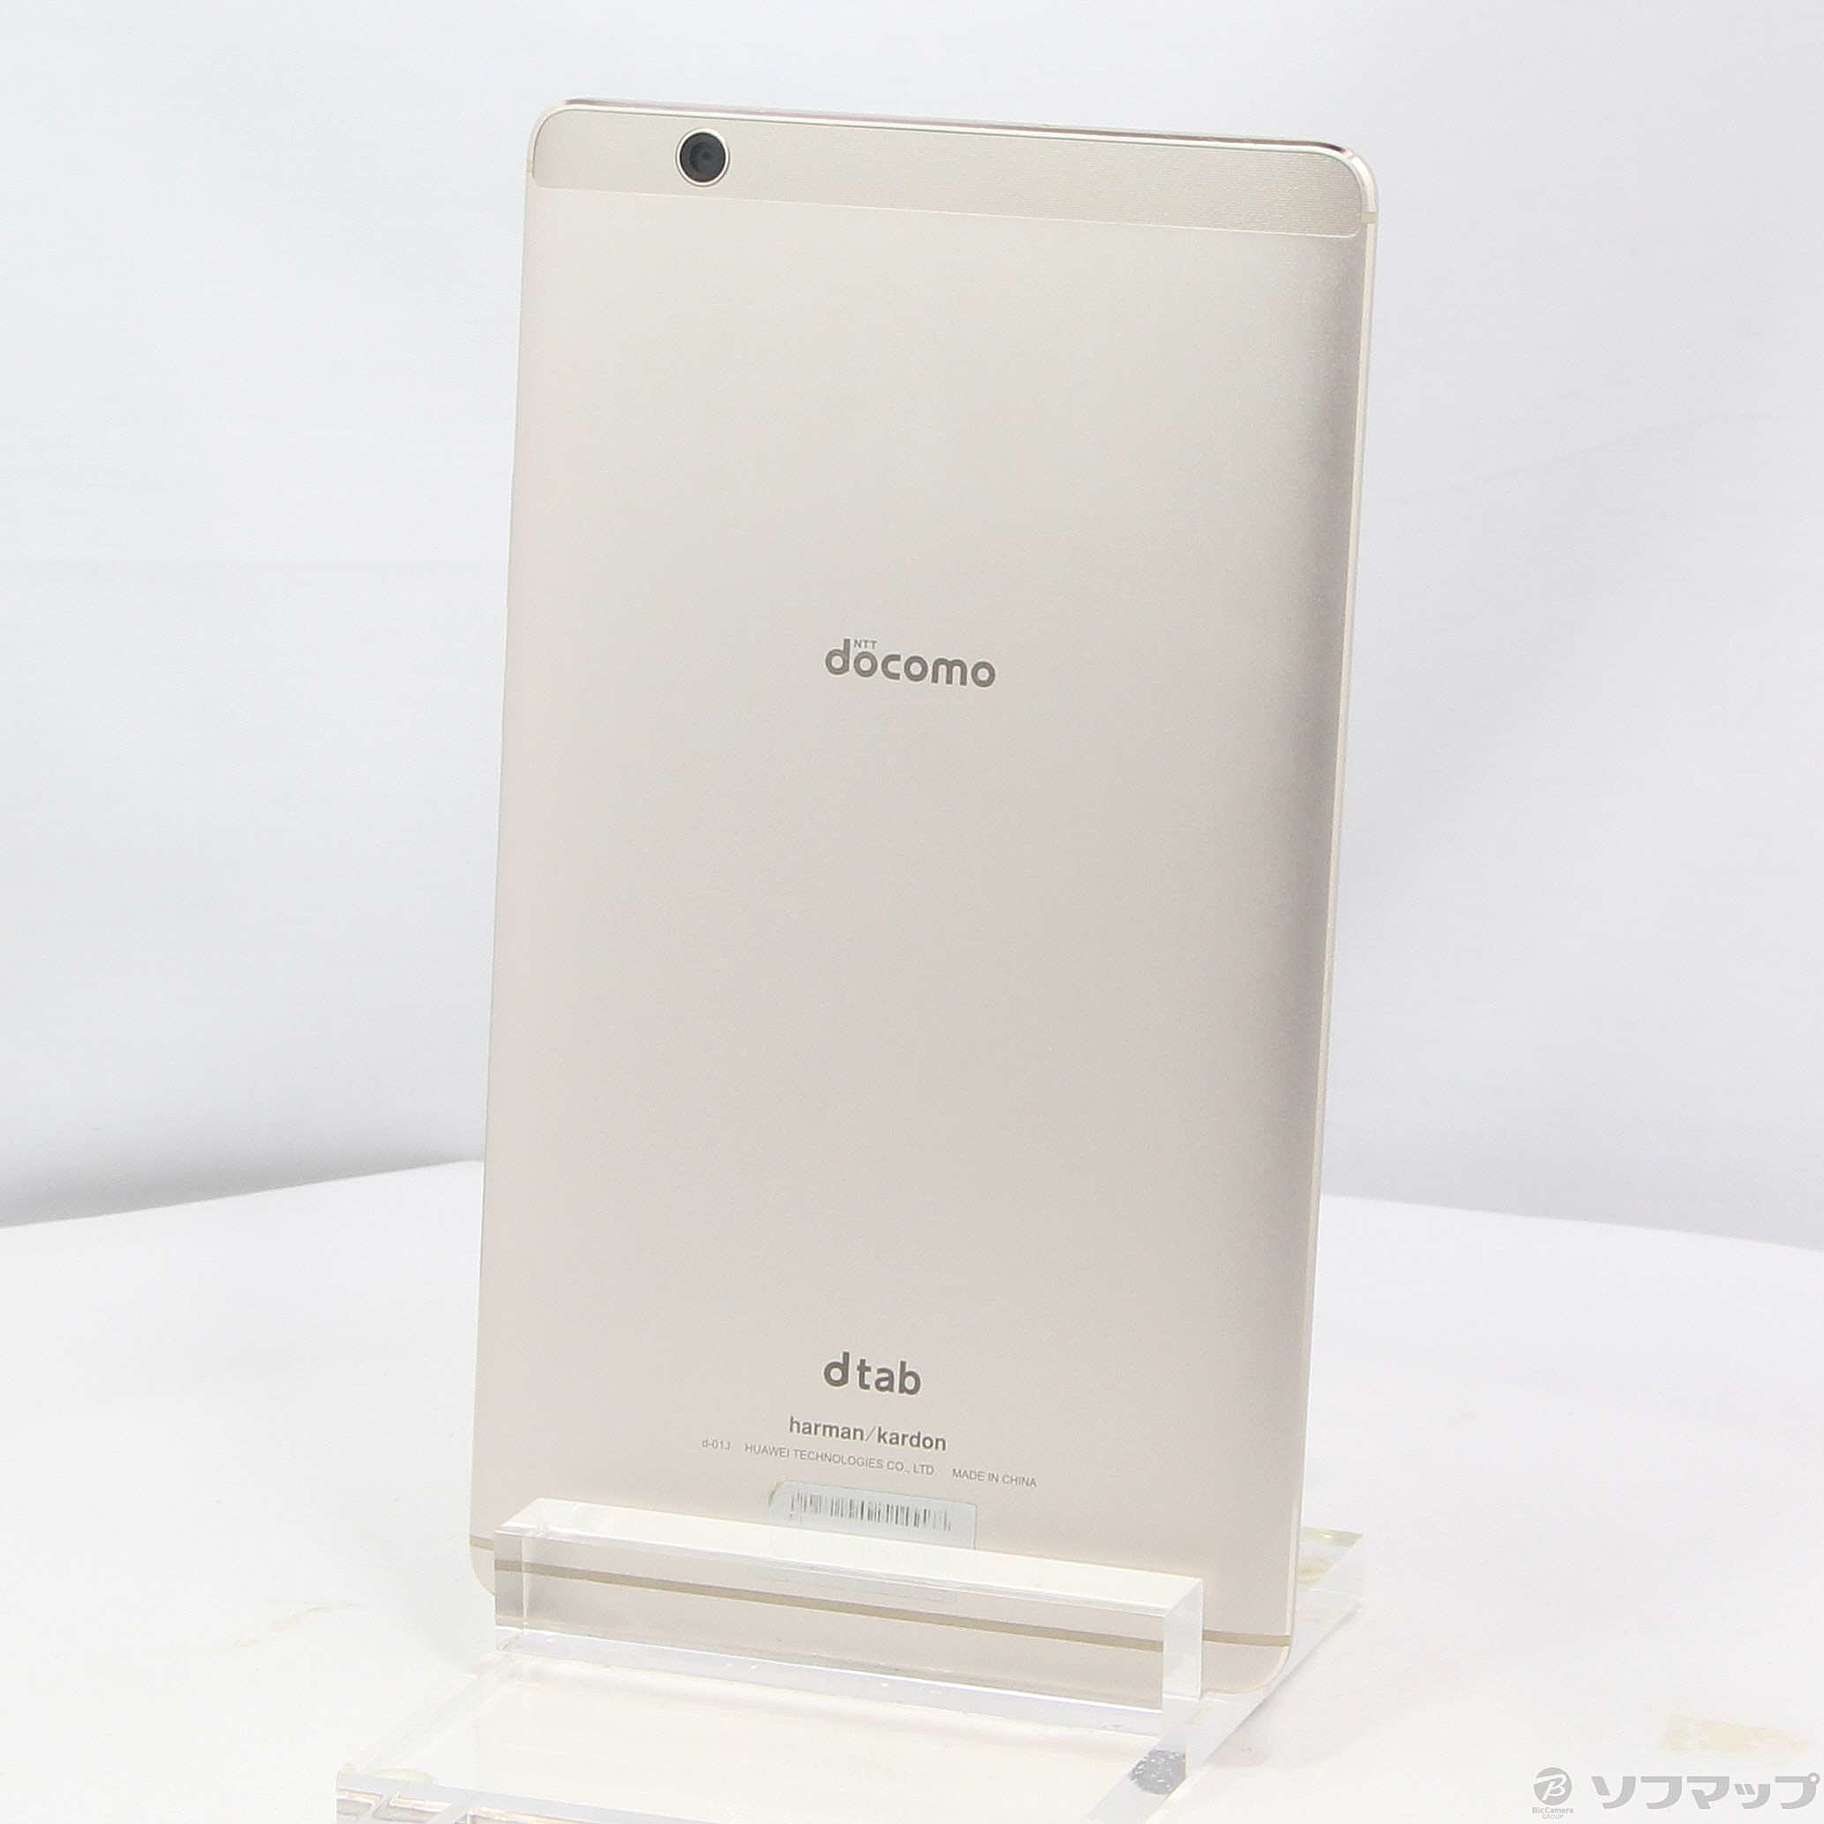 Androidドコモ タブレットHuawei dtab Compact d-01J Gold - Android 